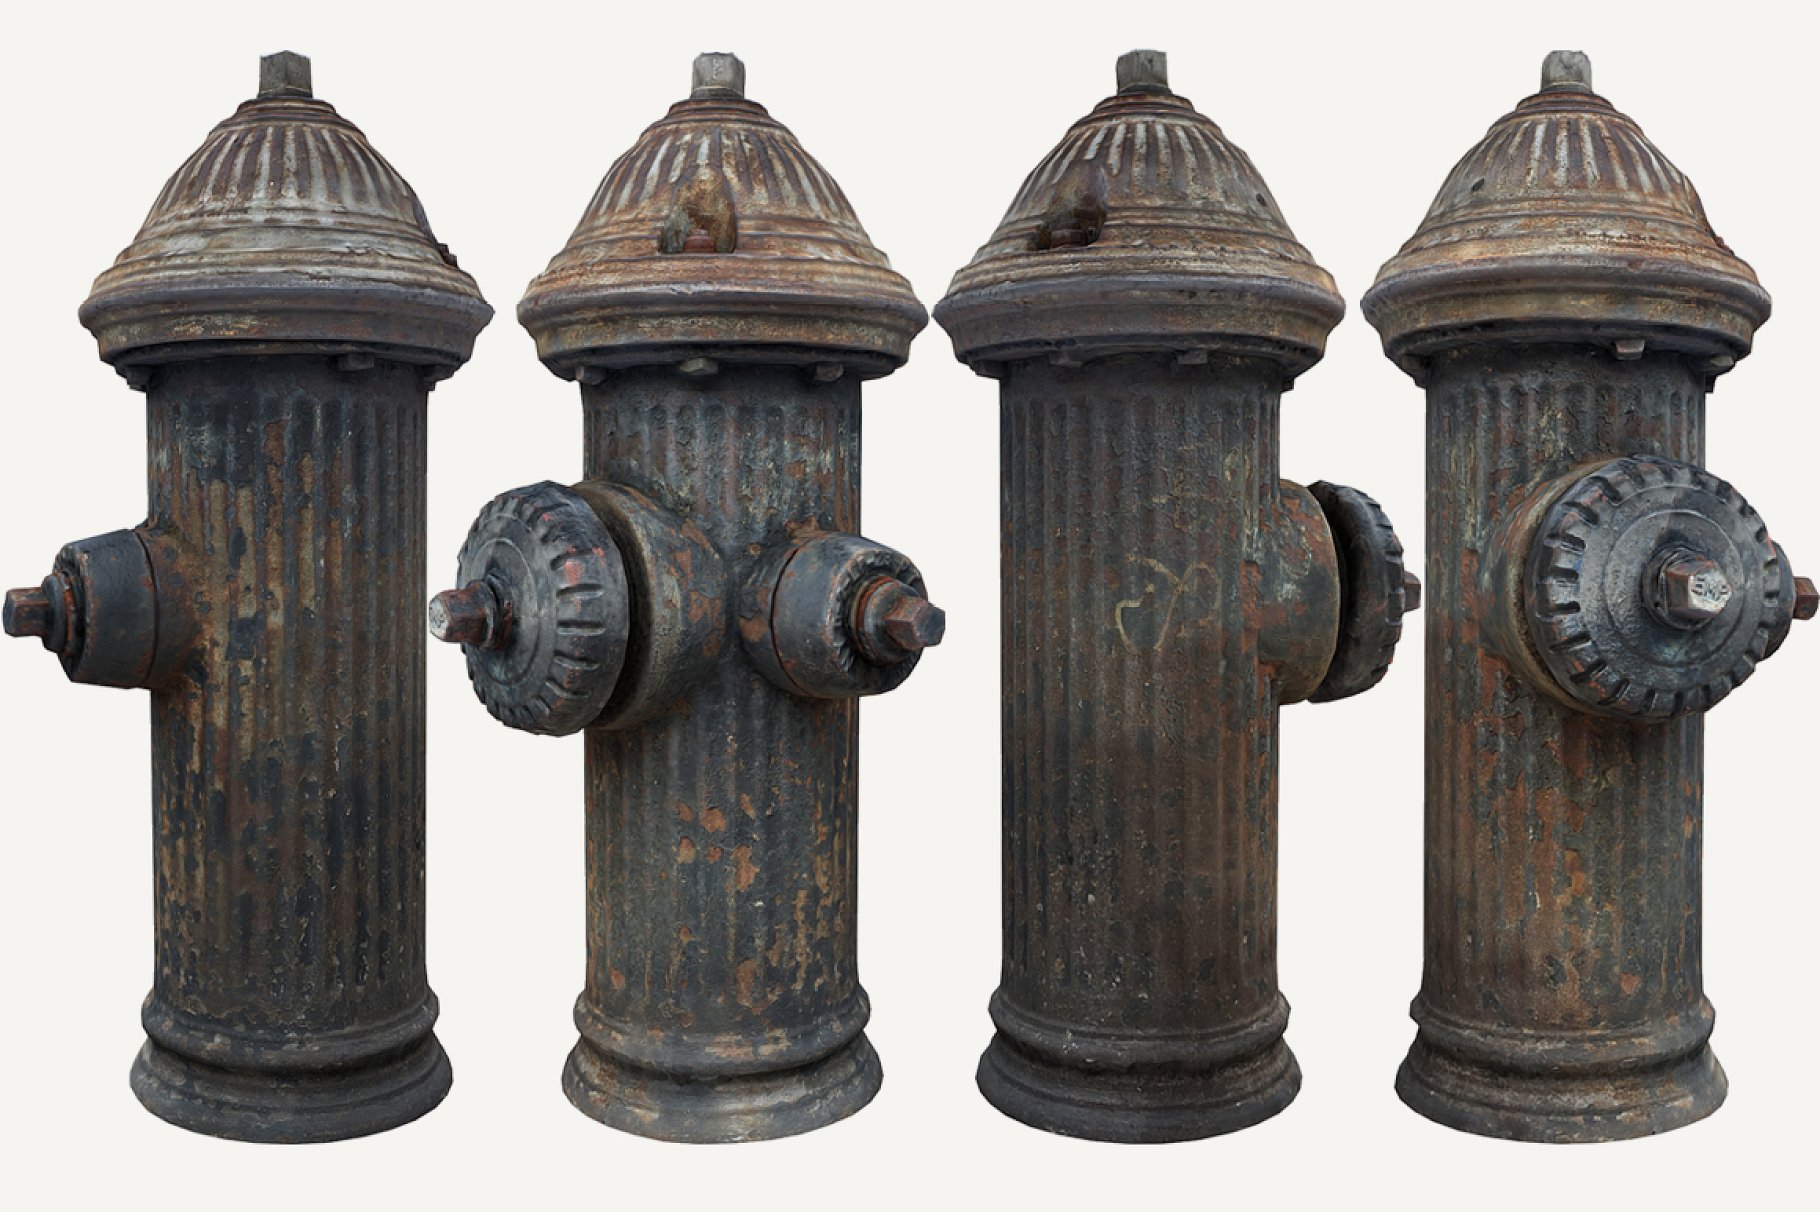 4 fire hydrant mockups in different sides.